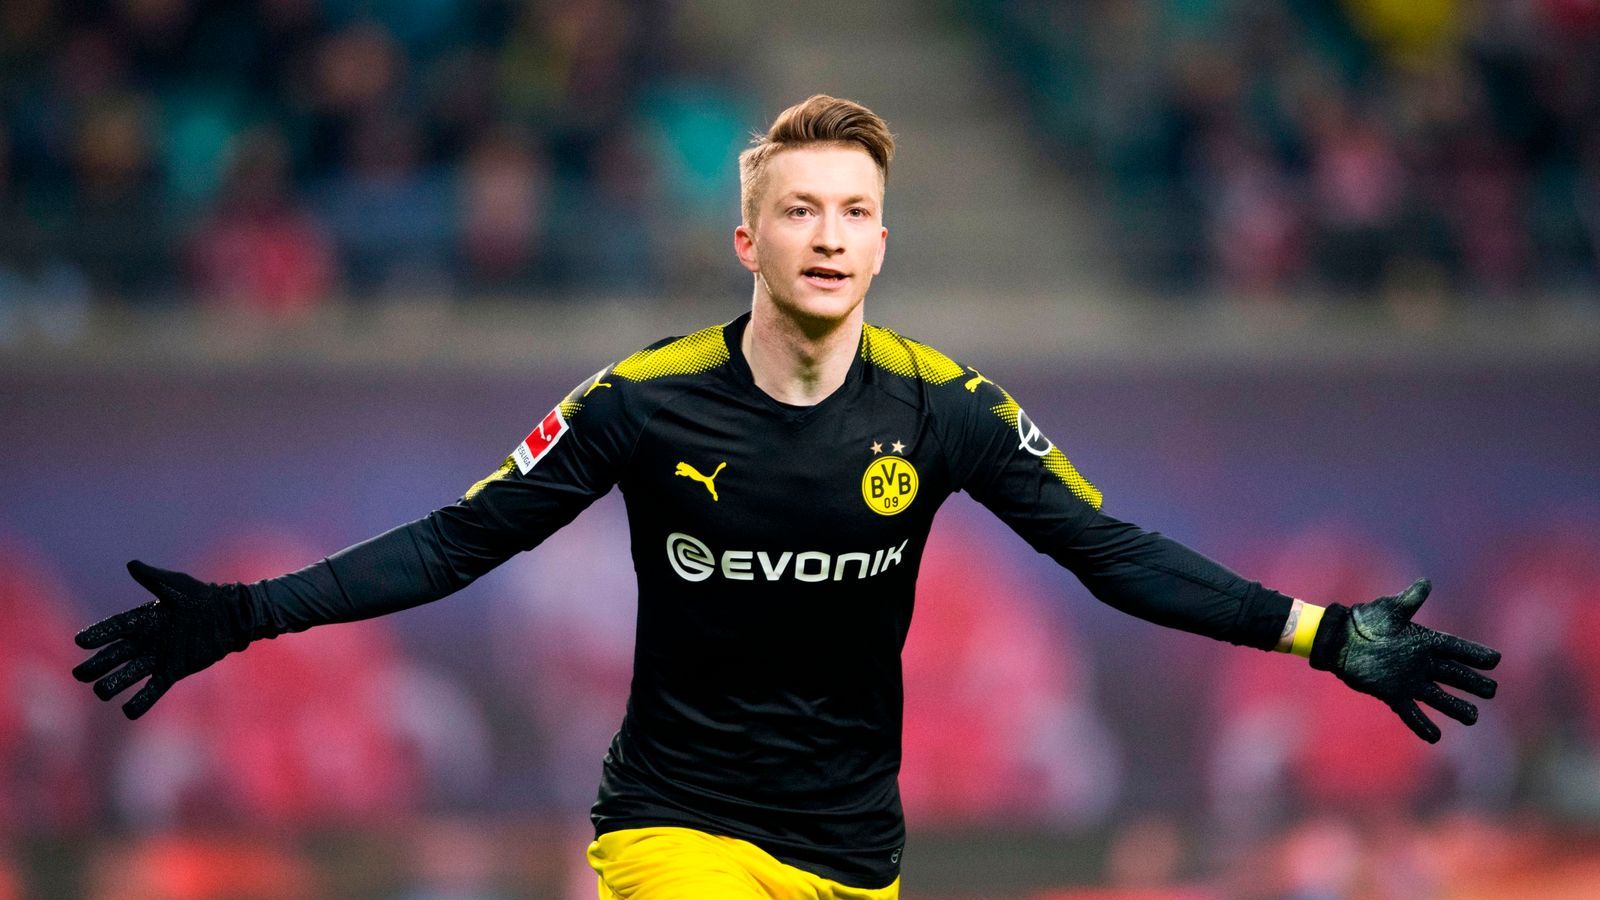 Marco Reus Signs New Five And A Half Year Deal To Stay At Borussia Dortmund Until 2023